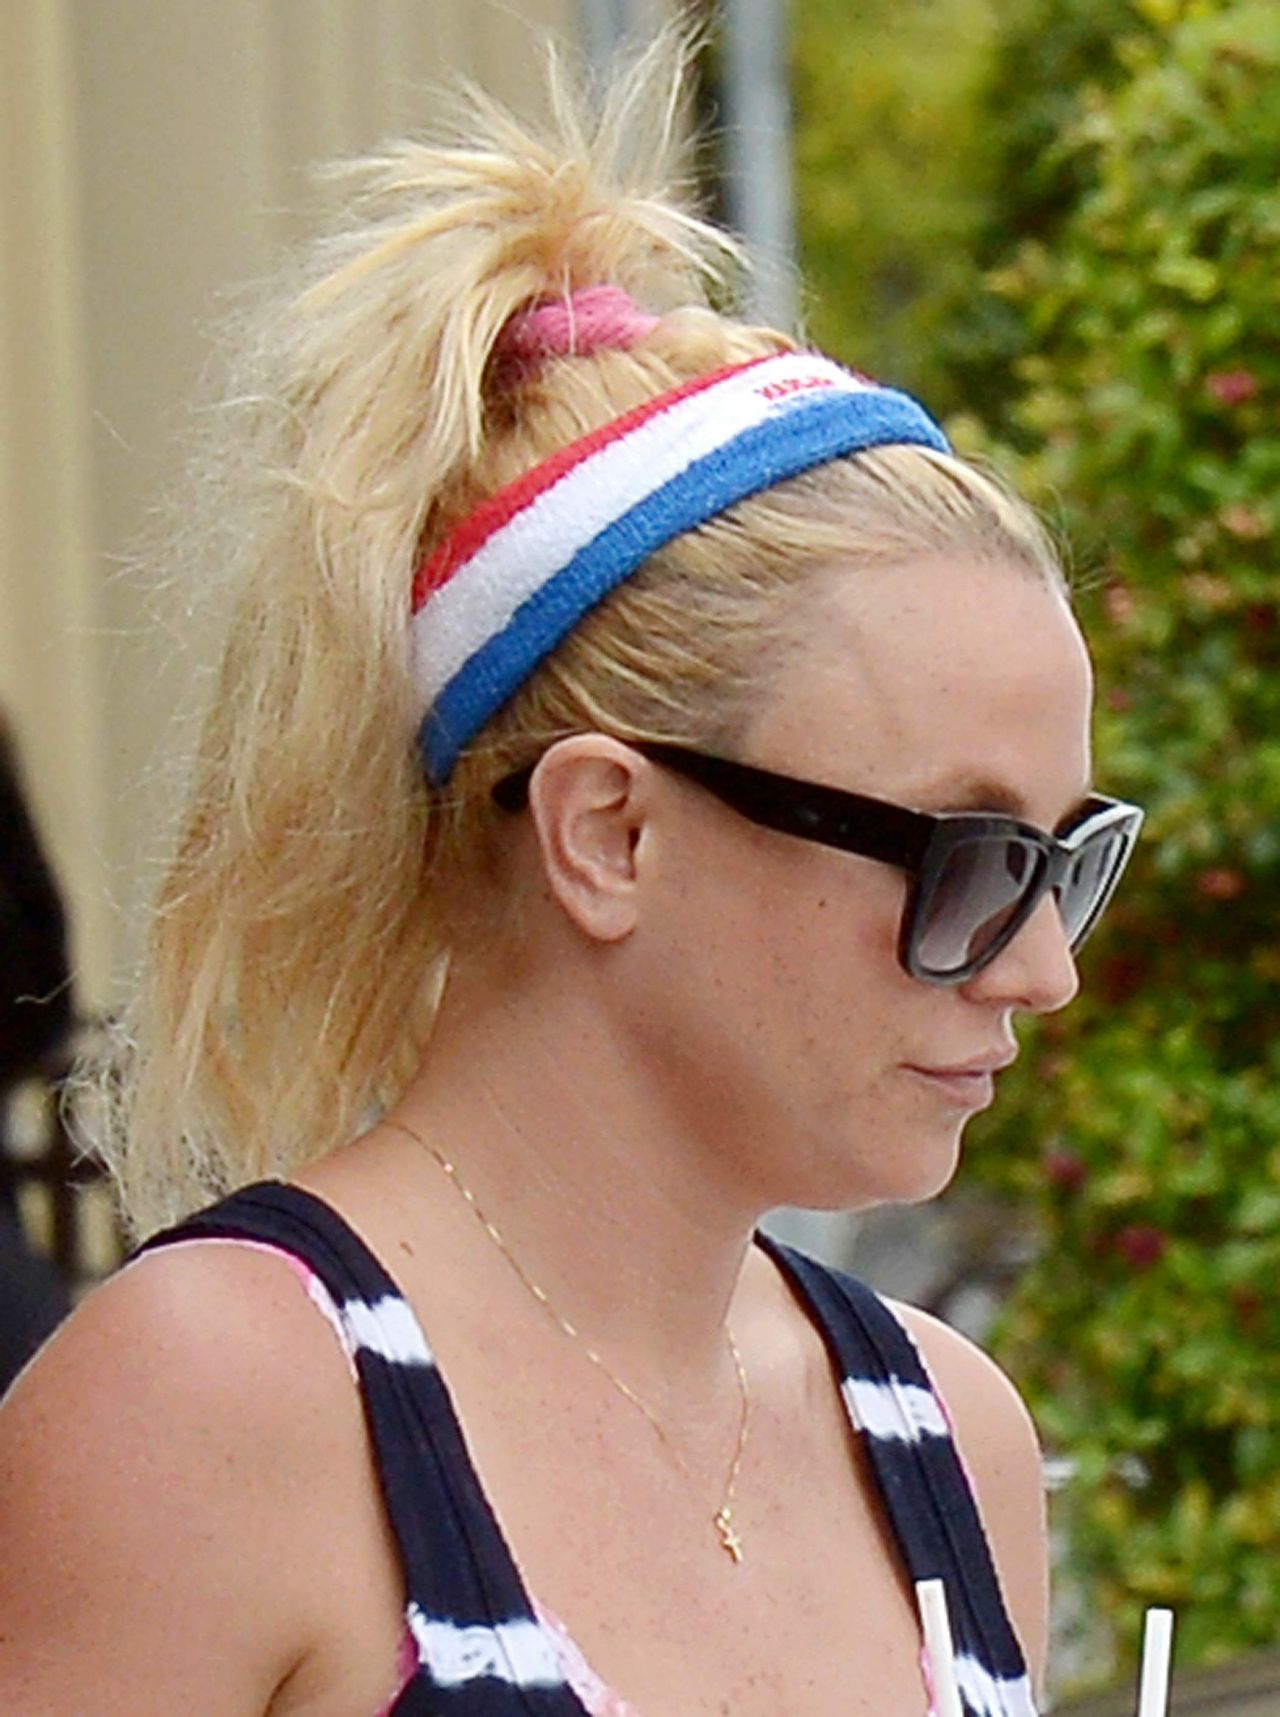 https://celebmafia.com/wp-content/uploads/2015/07/britney-spears-out-about-in-thousand-oaks-july-2015_2.jpg